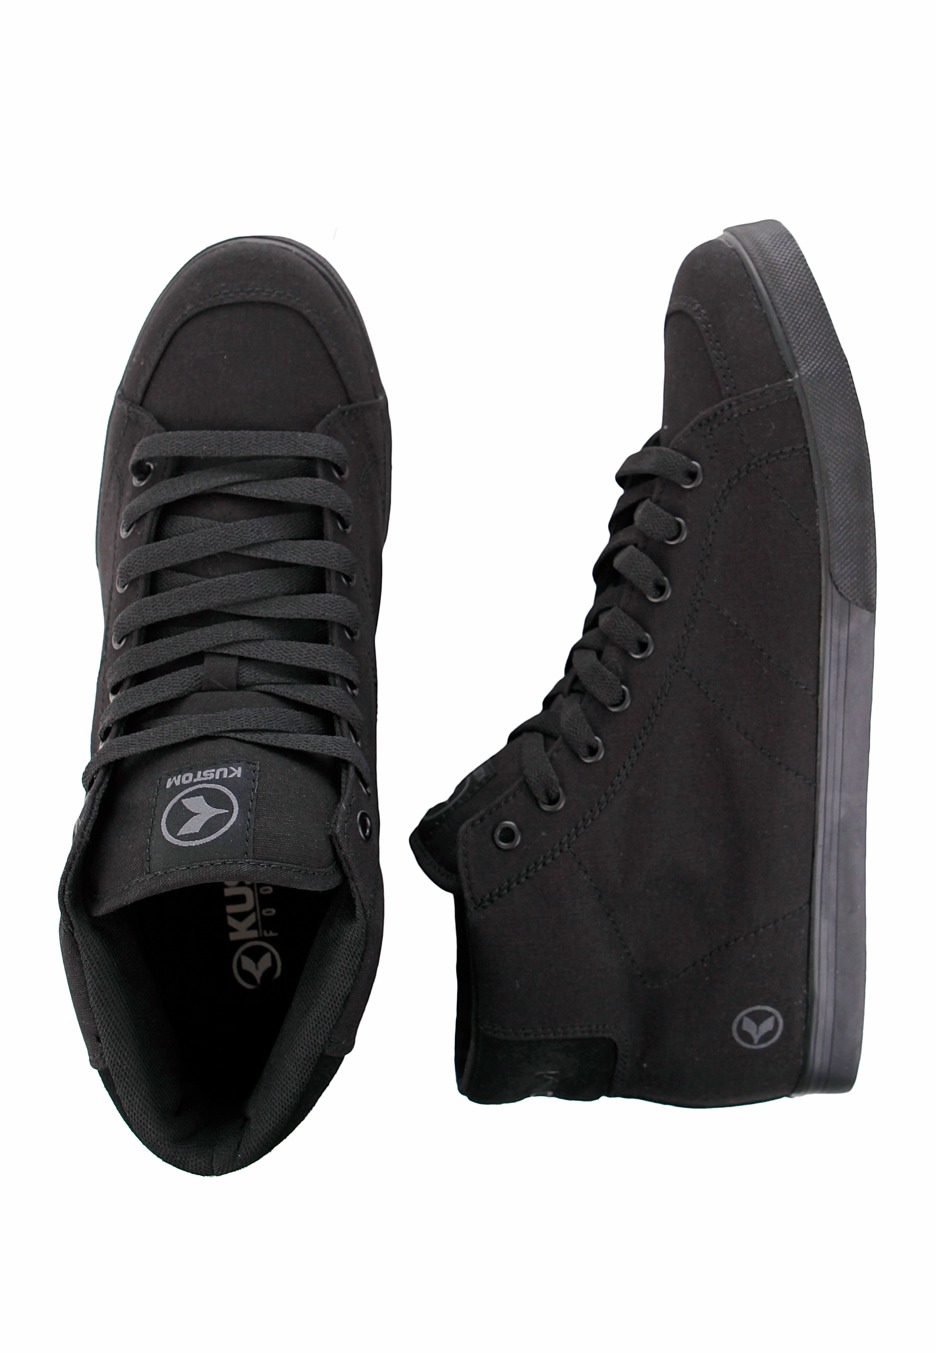 All black shoes footwear for your feet